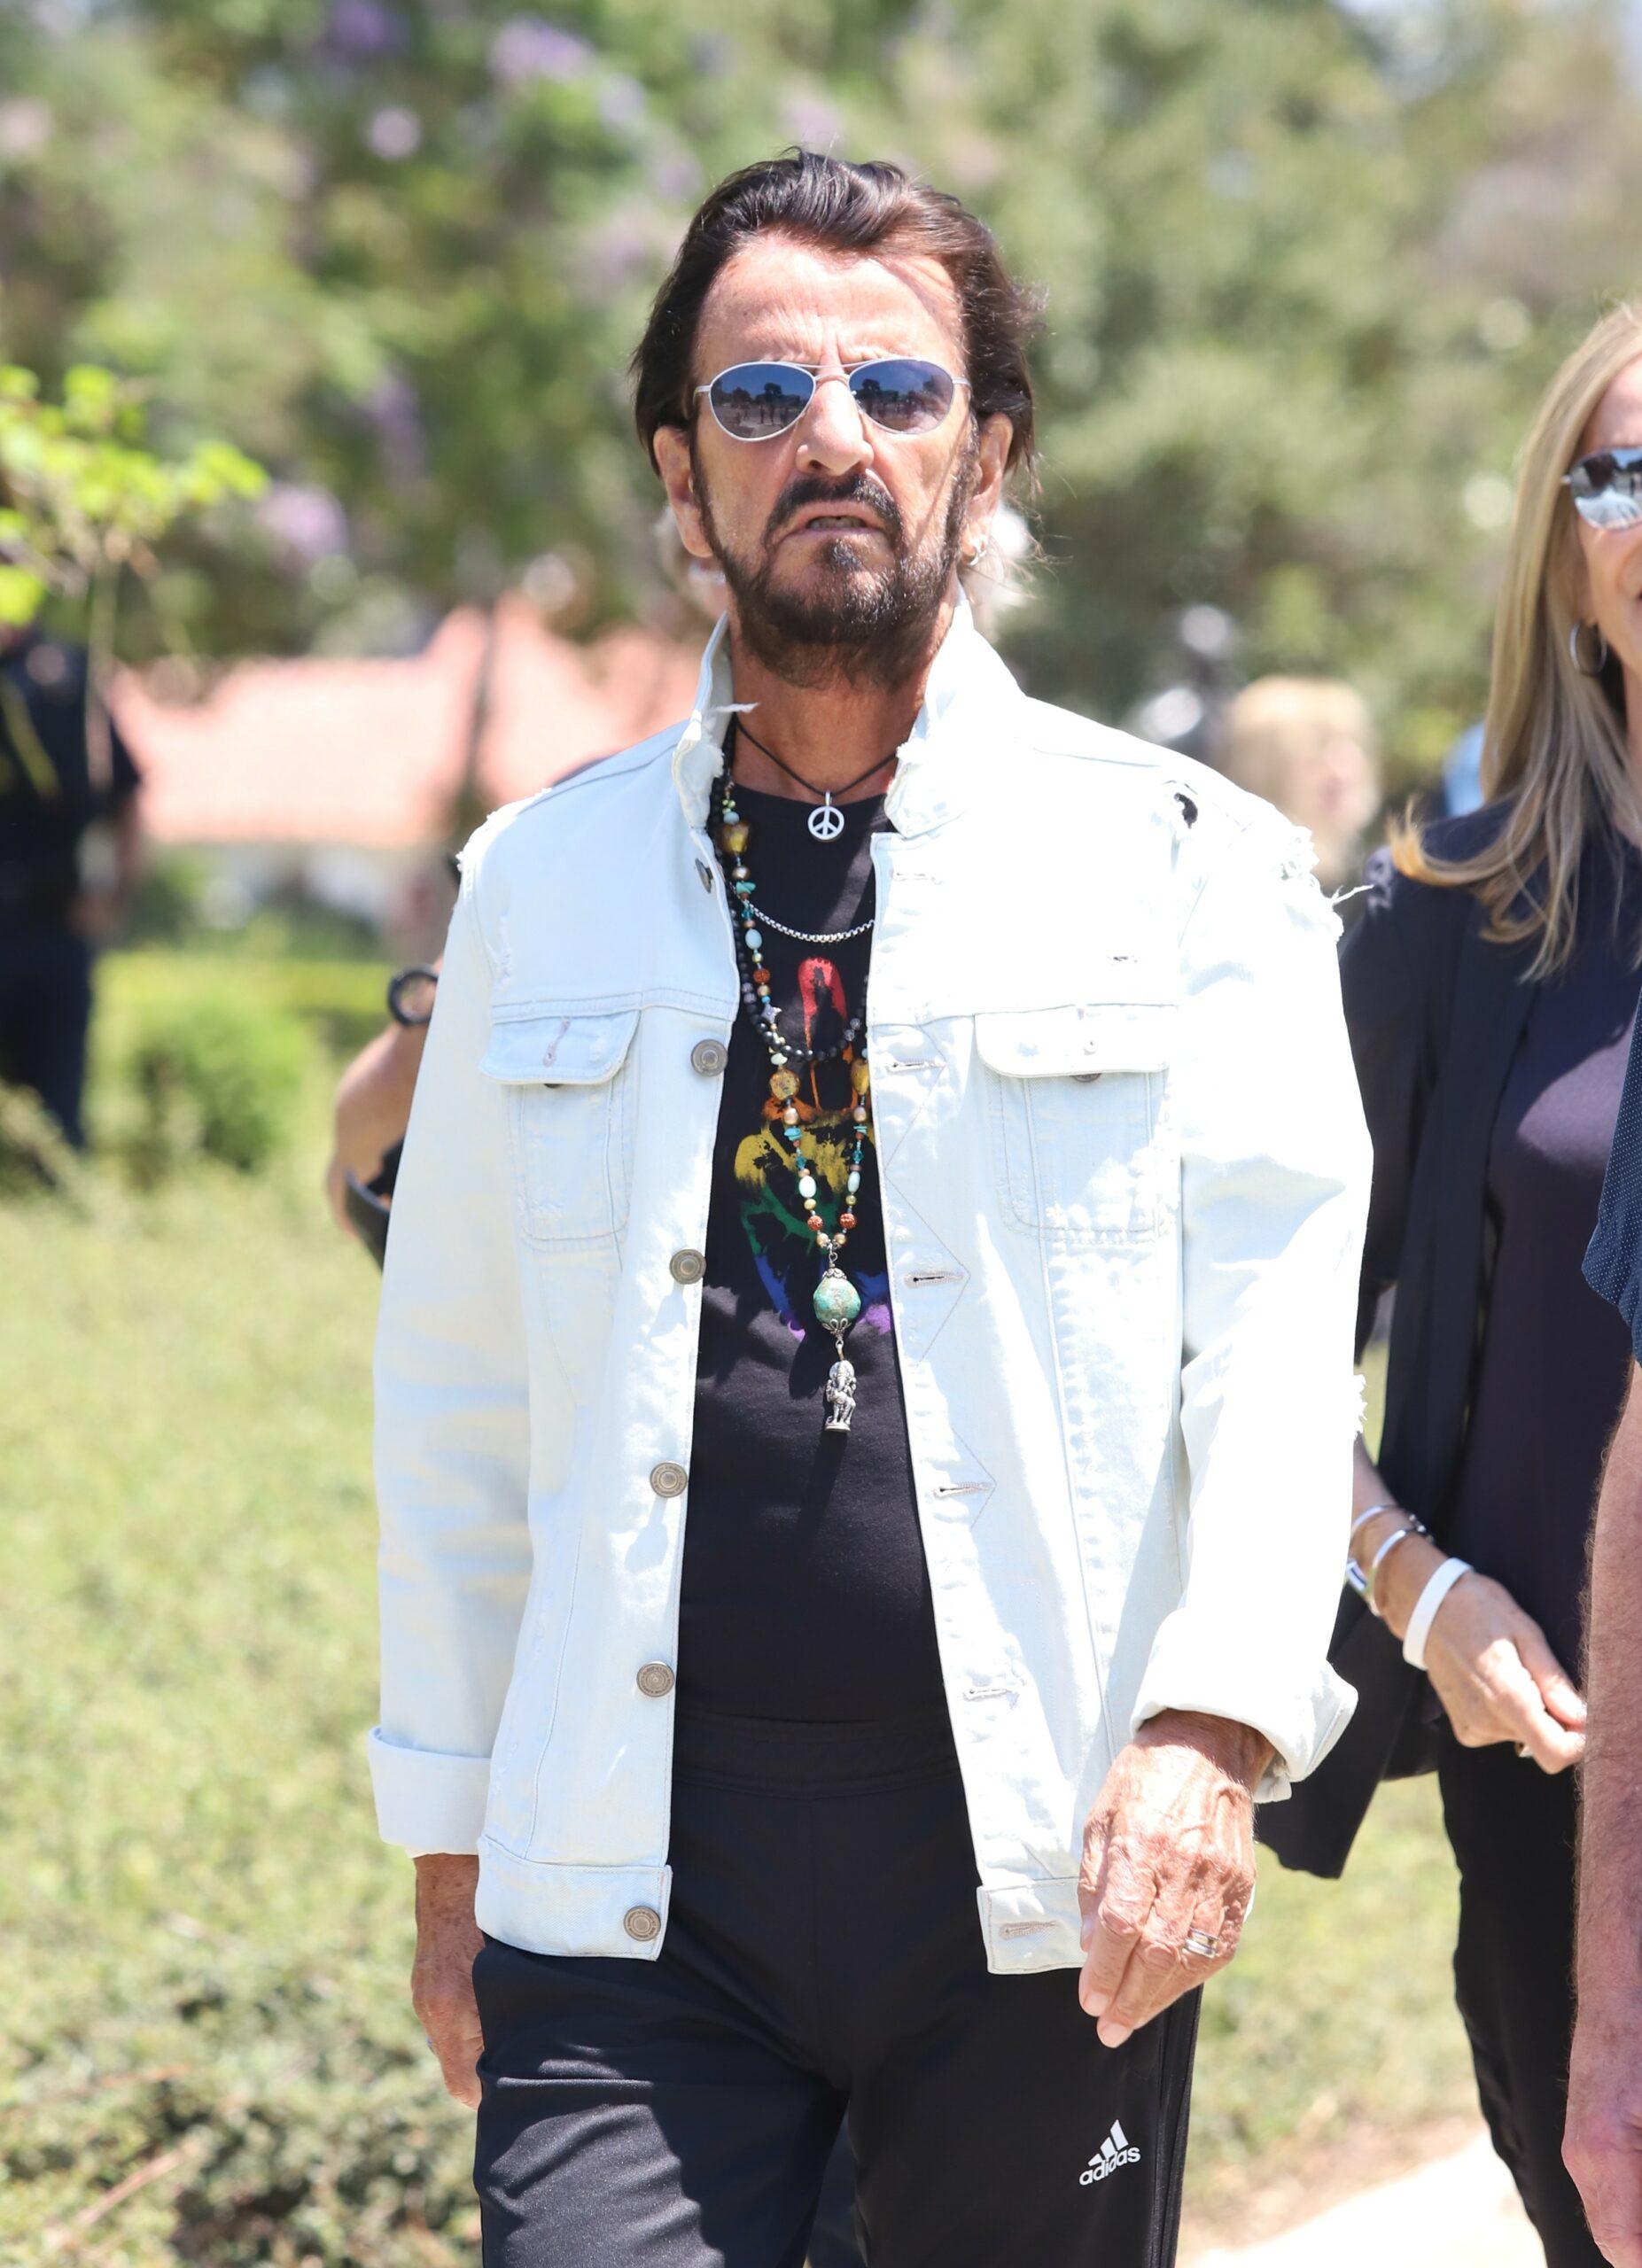 Ringo Starr celebrates his 81st birthday with a gathering and appears for his "Peace and Love" artwork to celebrate